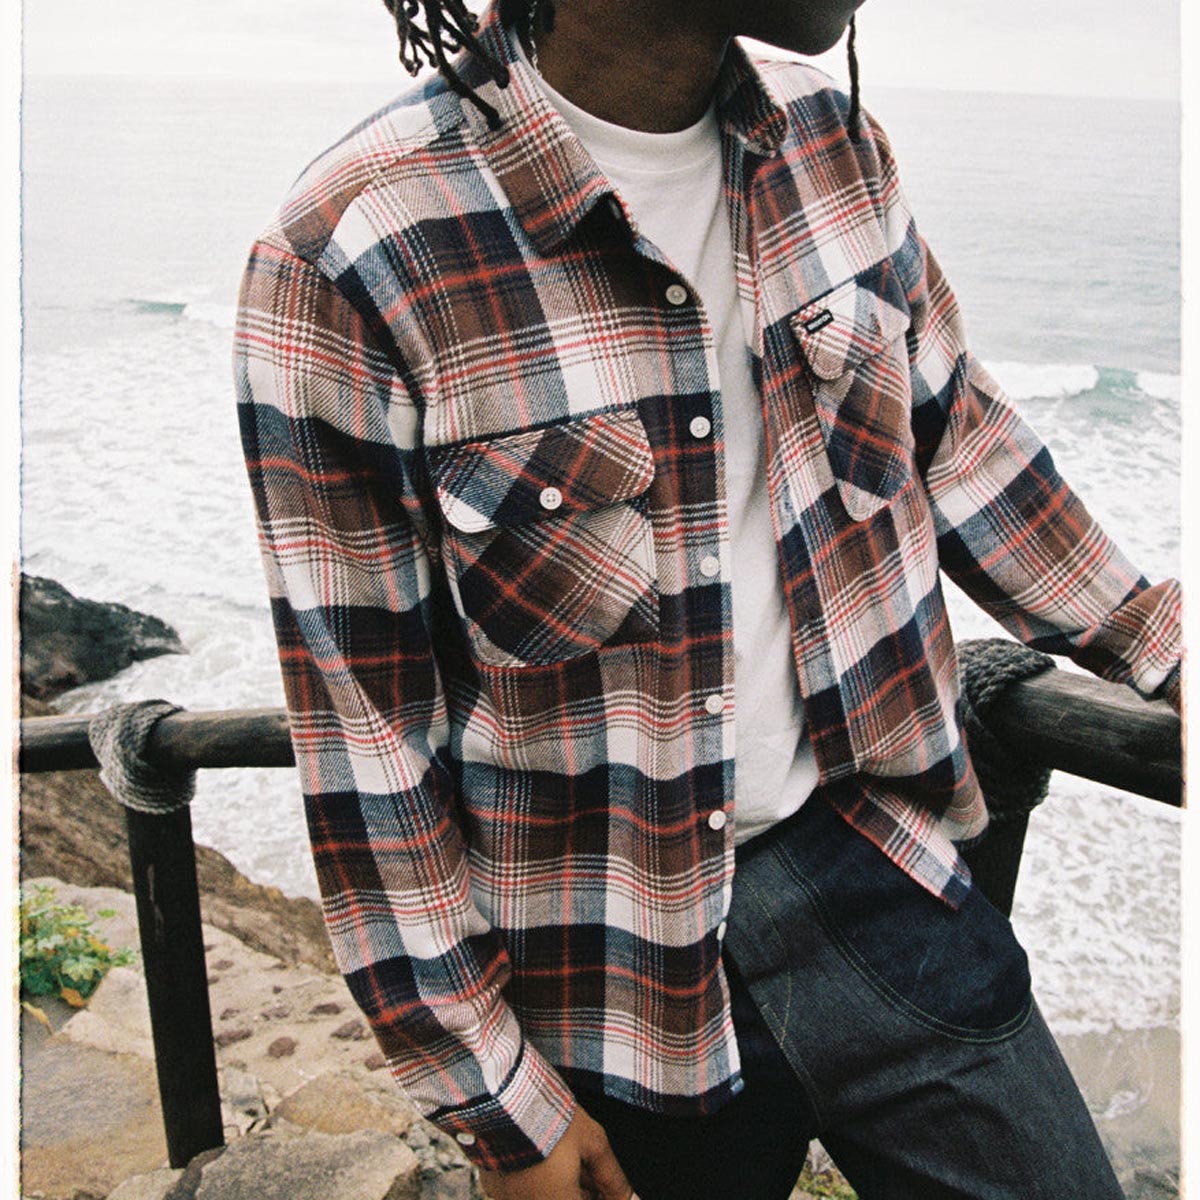 Brixton Bowery Flannel Long Sleeve Shirt - Washed Navy/Sepia/Off White image 4